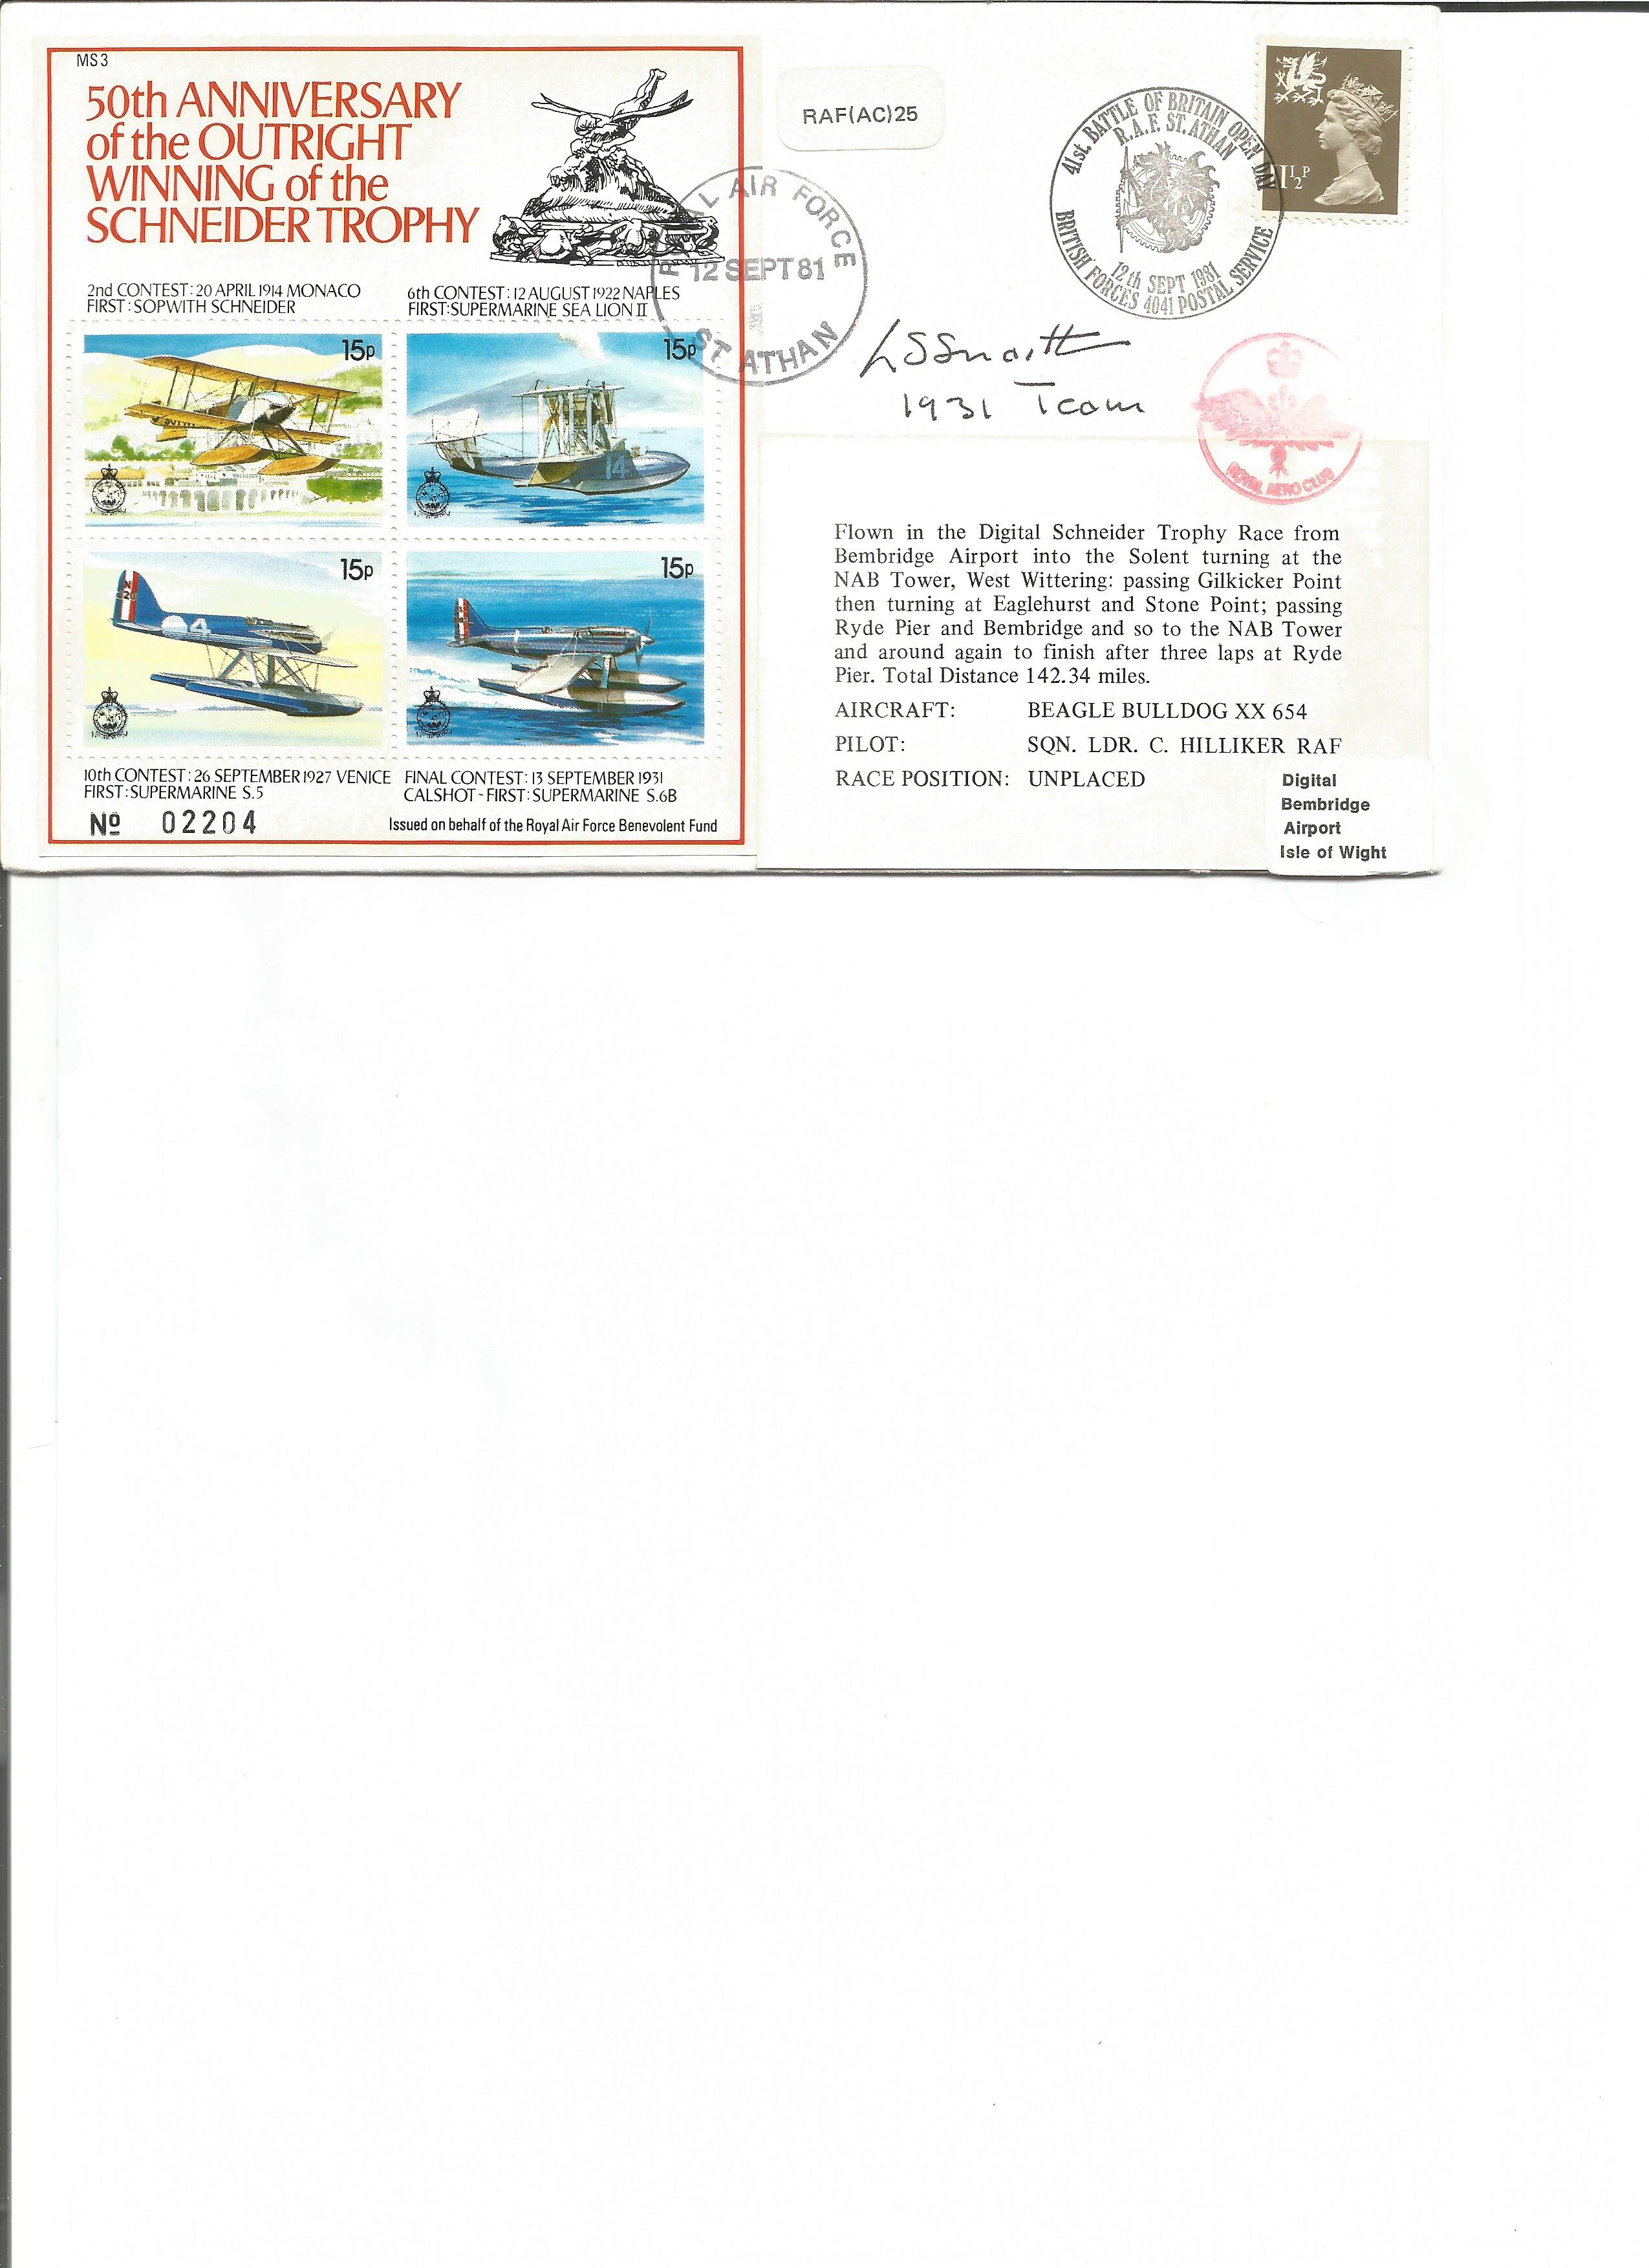 L S Snaith pilot 1931 Schneider Trophy signed 1981, 50th ann Air Race cover. Good Condition. All